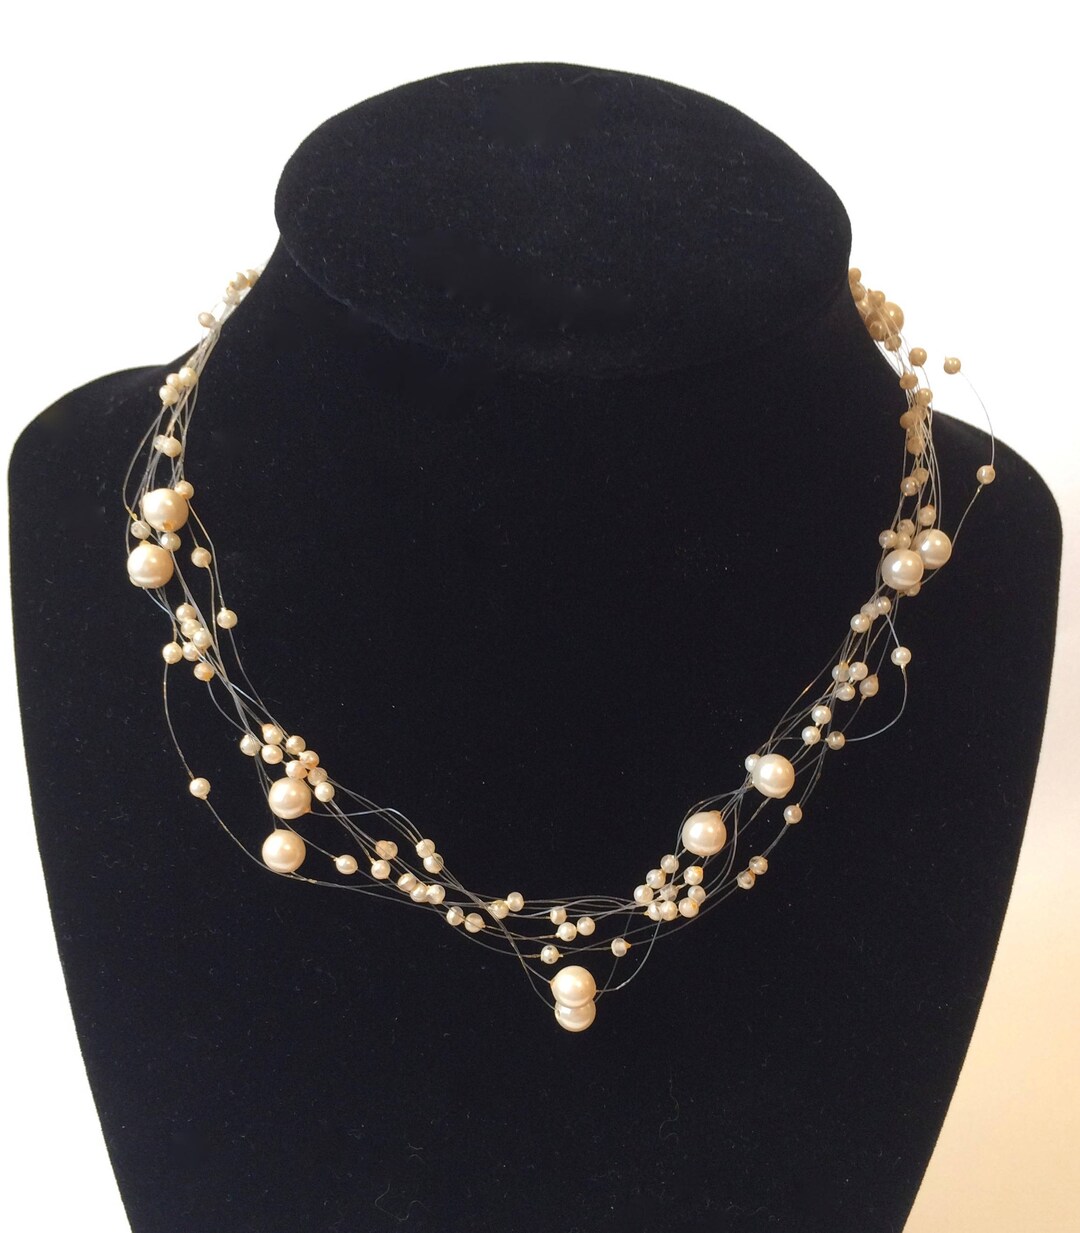 Pearl Necklace with Gold Pendant | Art of Gold Jewellery, Coimbatore